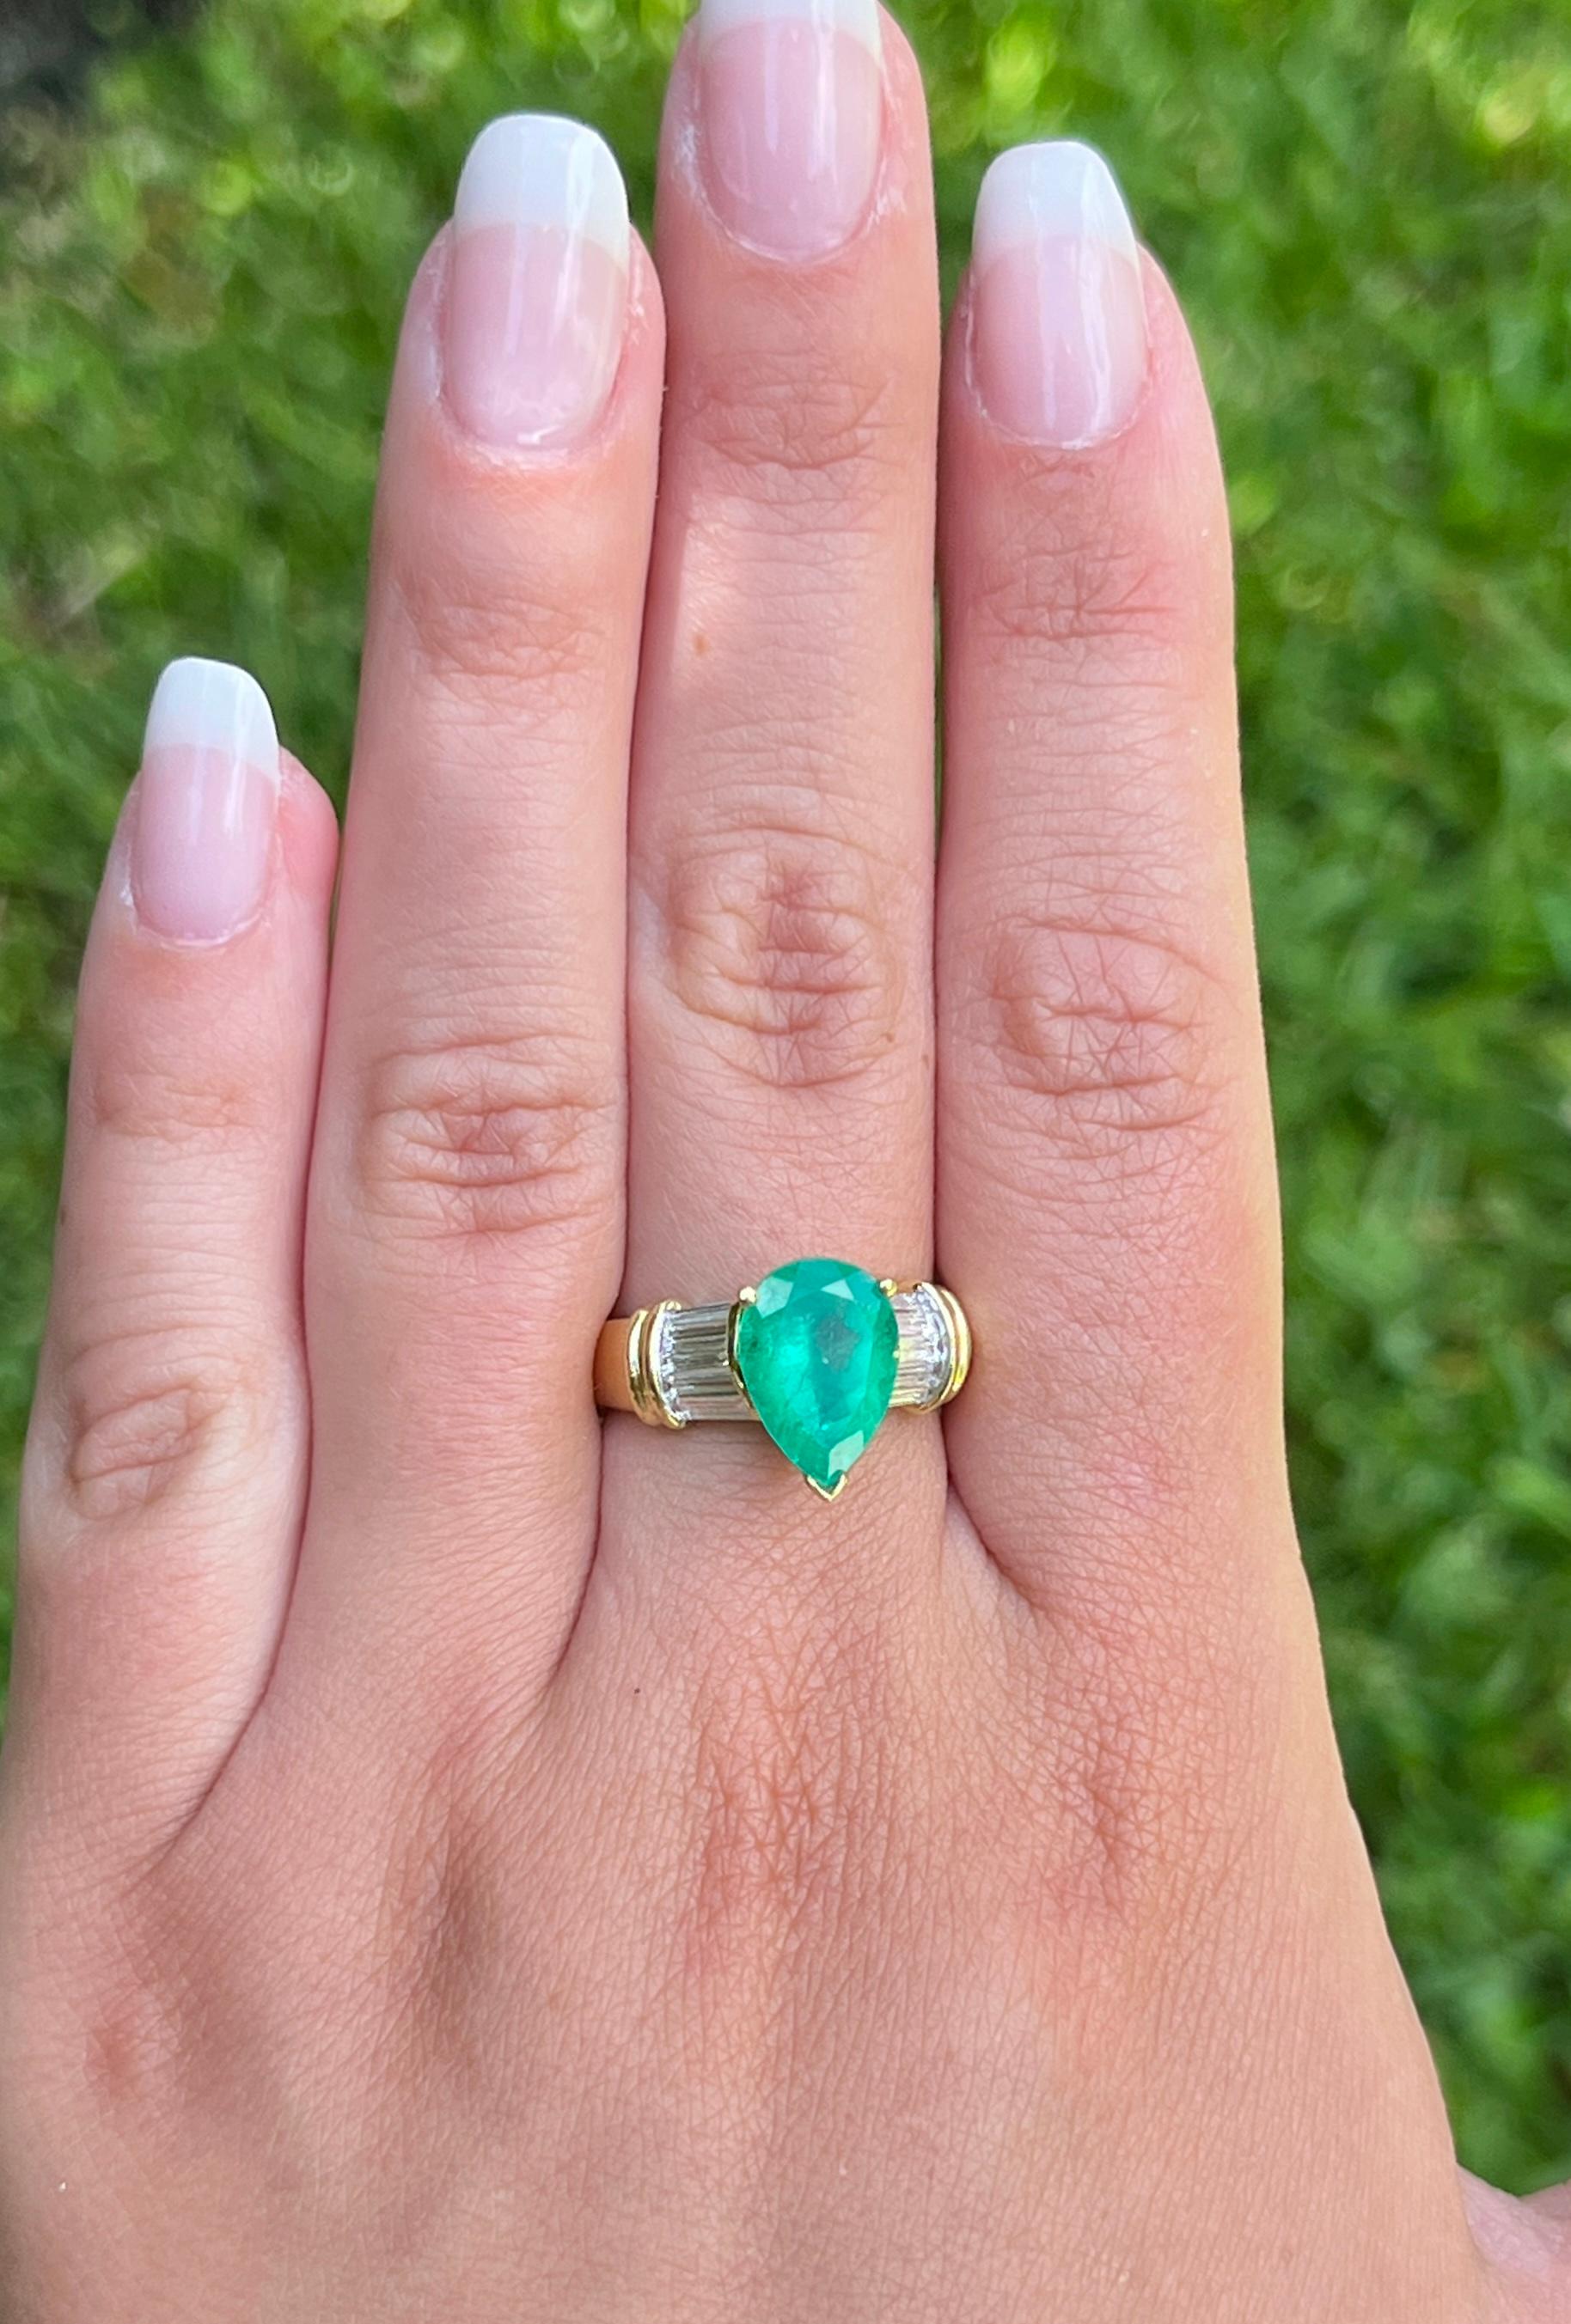 This ring presents a sophisticated blend of elegance and luxury, showcasing a 3.22 carat pear-shaped natural Colombian emerald center stone. Adorned with 0.66 CTTW in baguette-cut diamond side stones. The center stone is set in a 3-prong setting